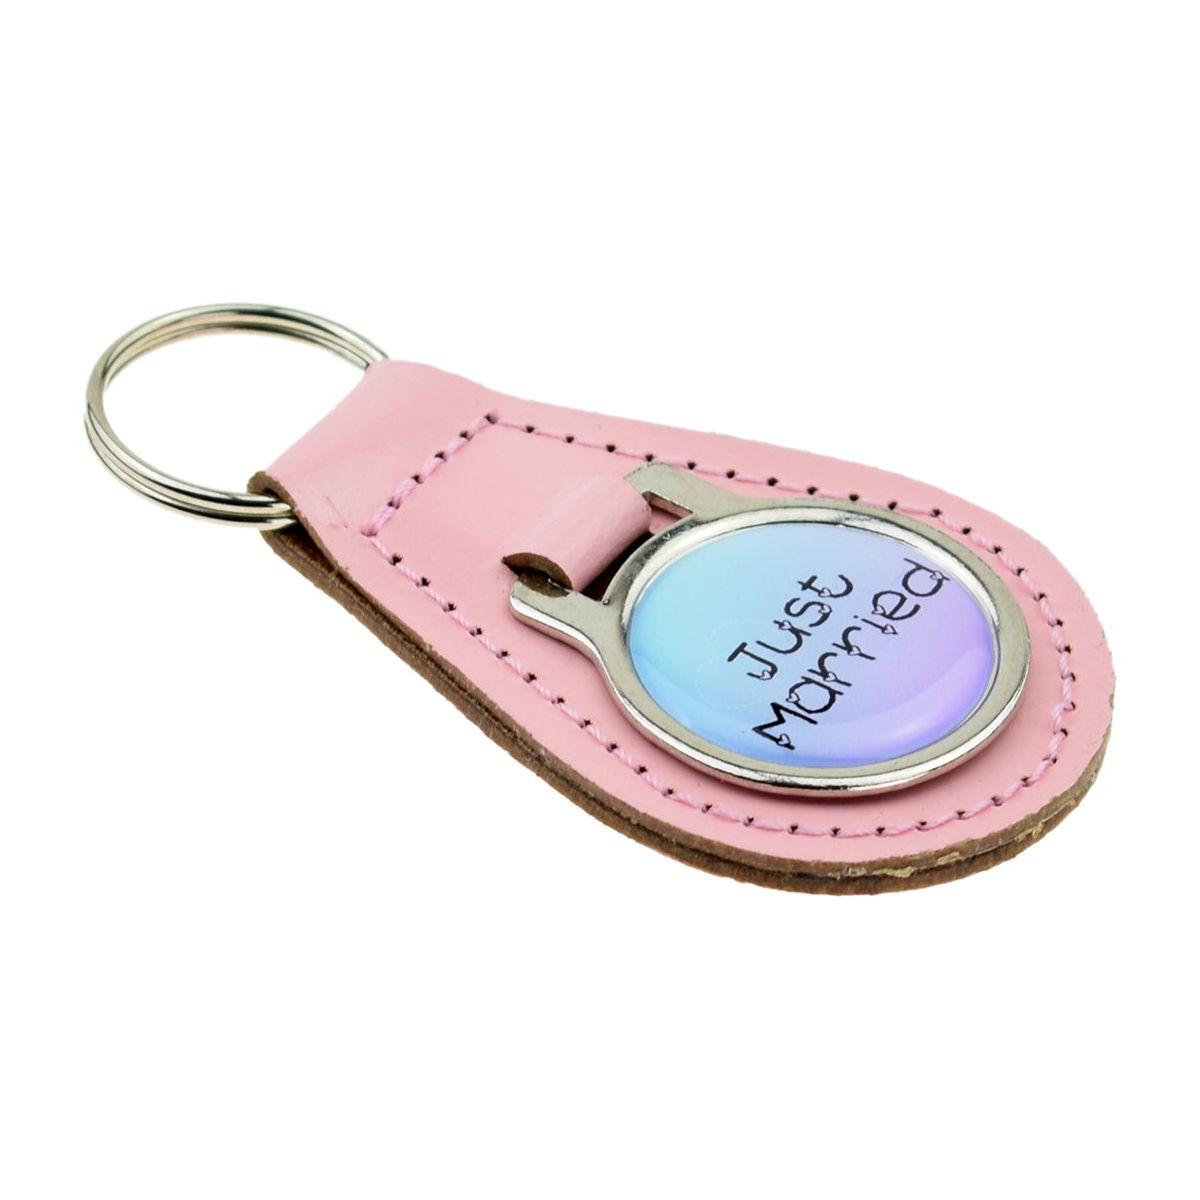 Ladies Just Married Keyring - Ashton and Finch